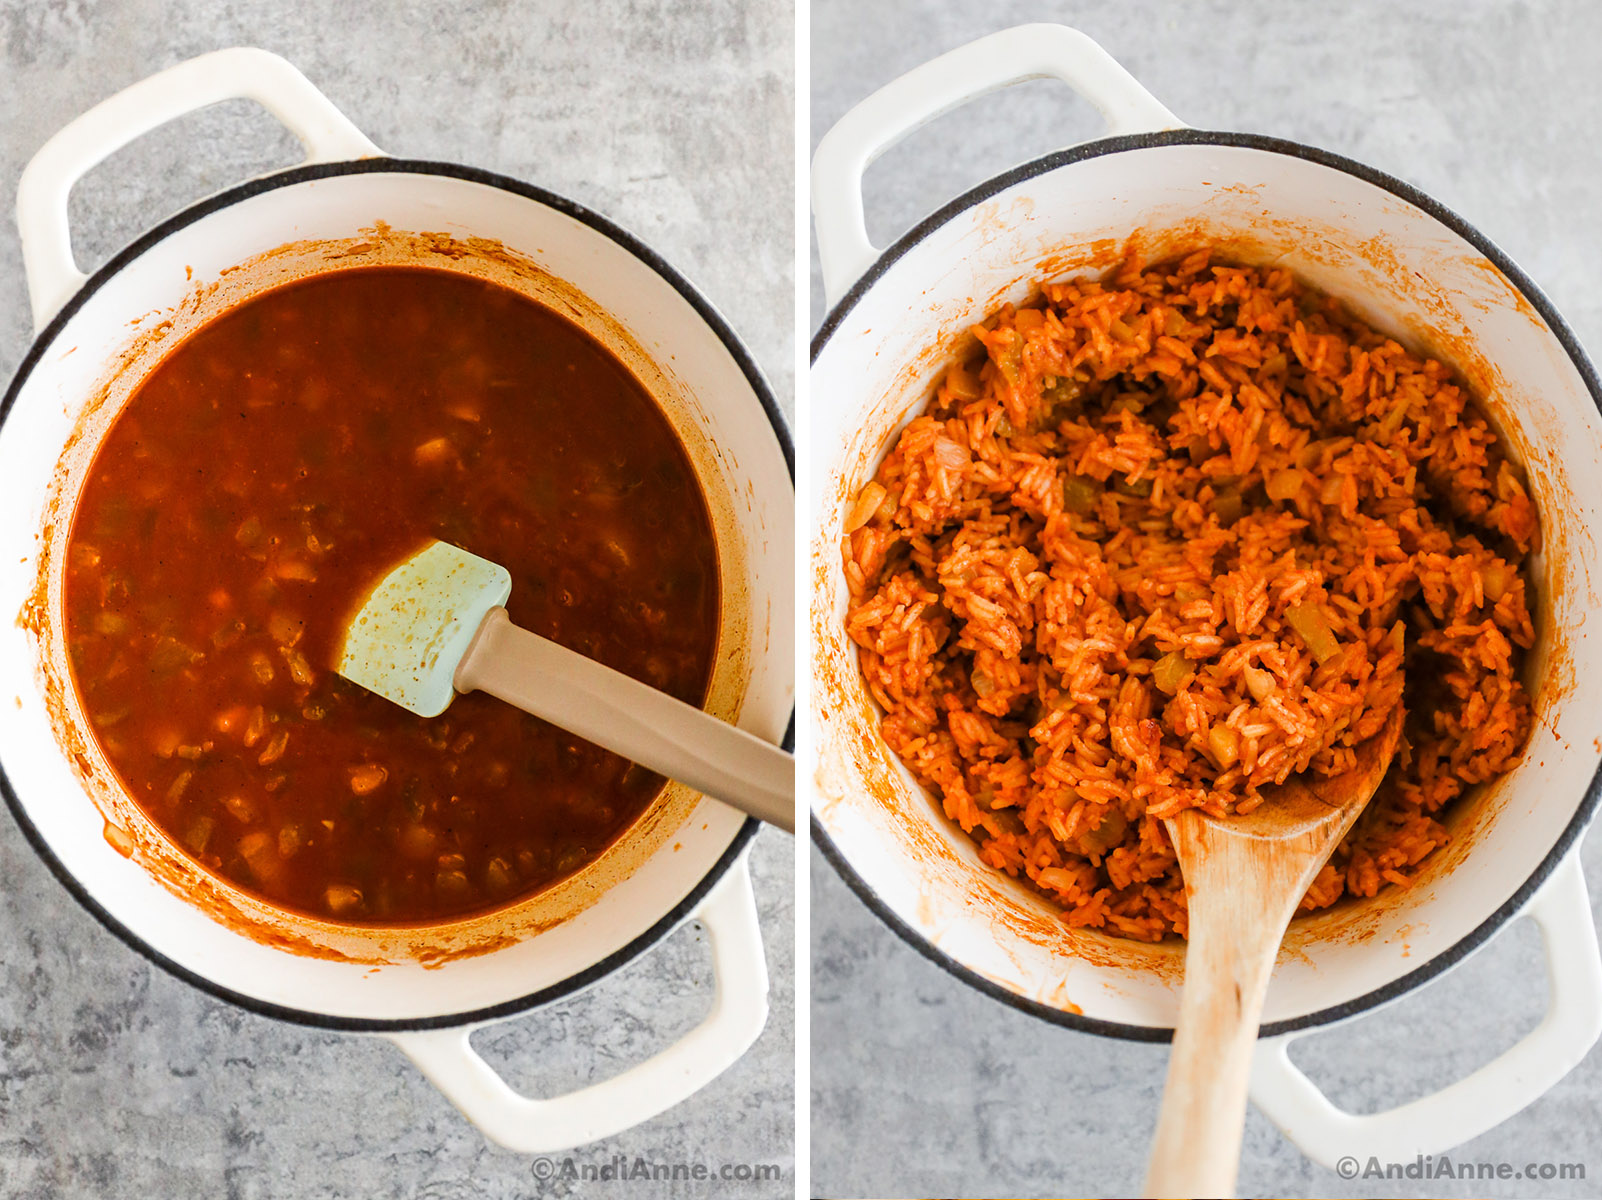 Two images of a white pot. First is red liquid with ingredients. Second is cooked taco rice in a white pot with a wood spoon.